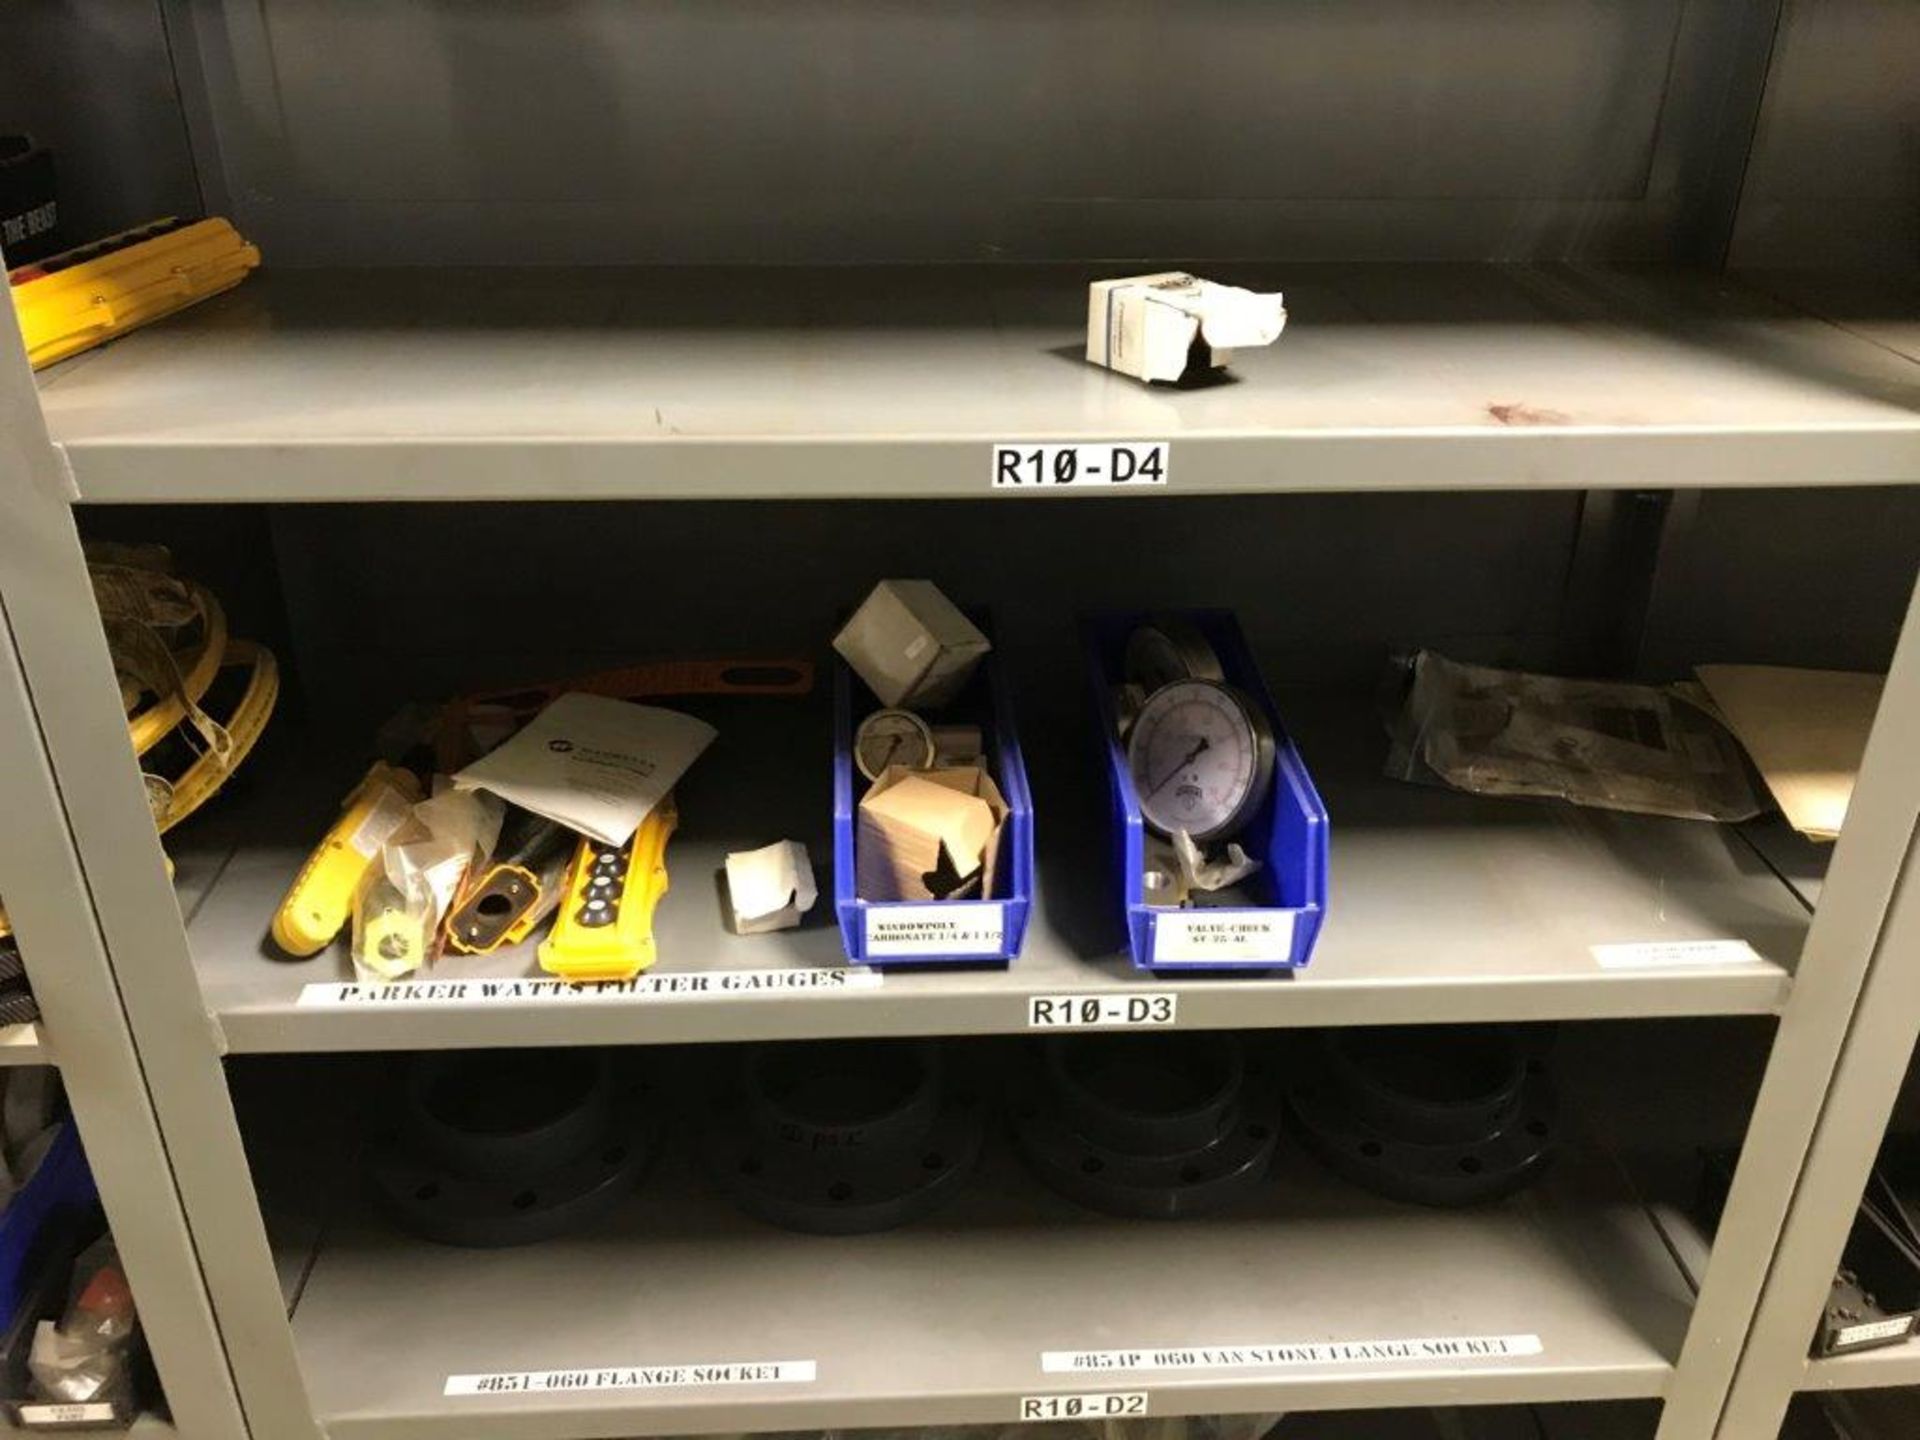 Assorted Crane Spare Parts Contents of (7) Sections of Shelving (Location Mezzanine) - Image 3 of 4